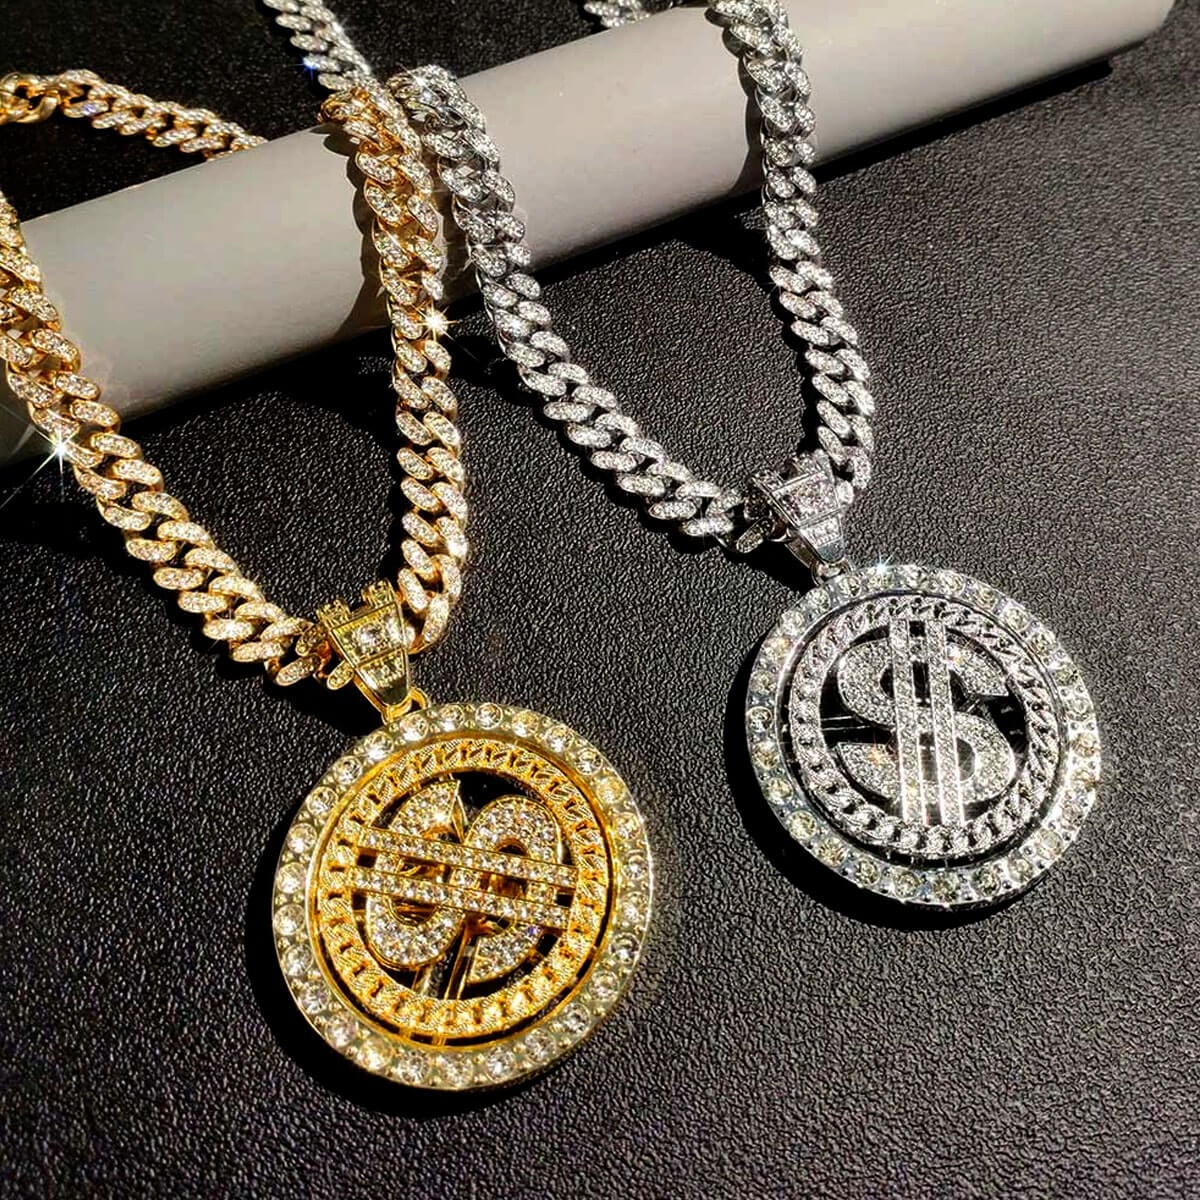 Buy Antiquestreet Unisex Hip Hop Hindi Pendant Necklace Crystal Cuban Chain  HipHop Iced Out Bling Necklaces Fashion Jewelry Silver at Amazon.in